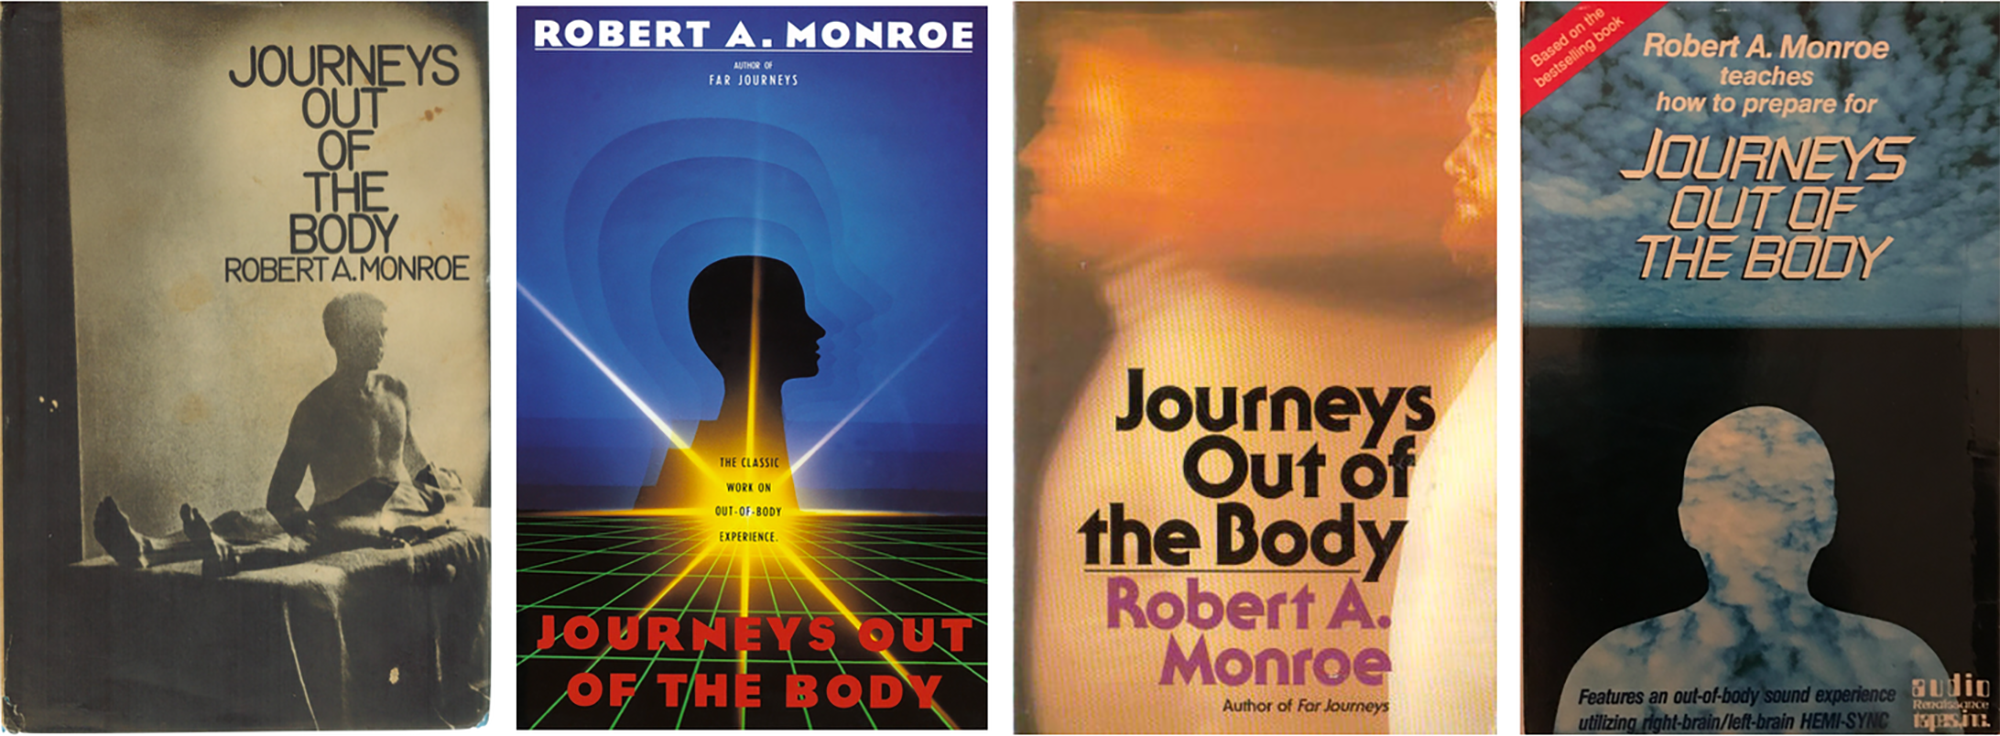 Far journey. Monroe, Robert a. Journeys out of the body.